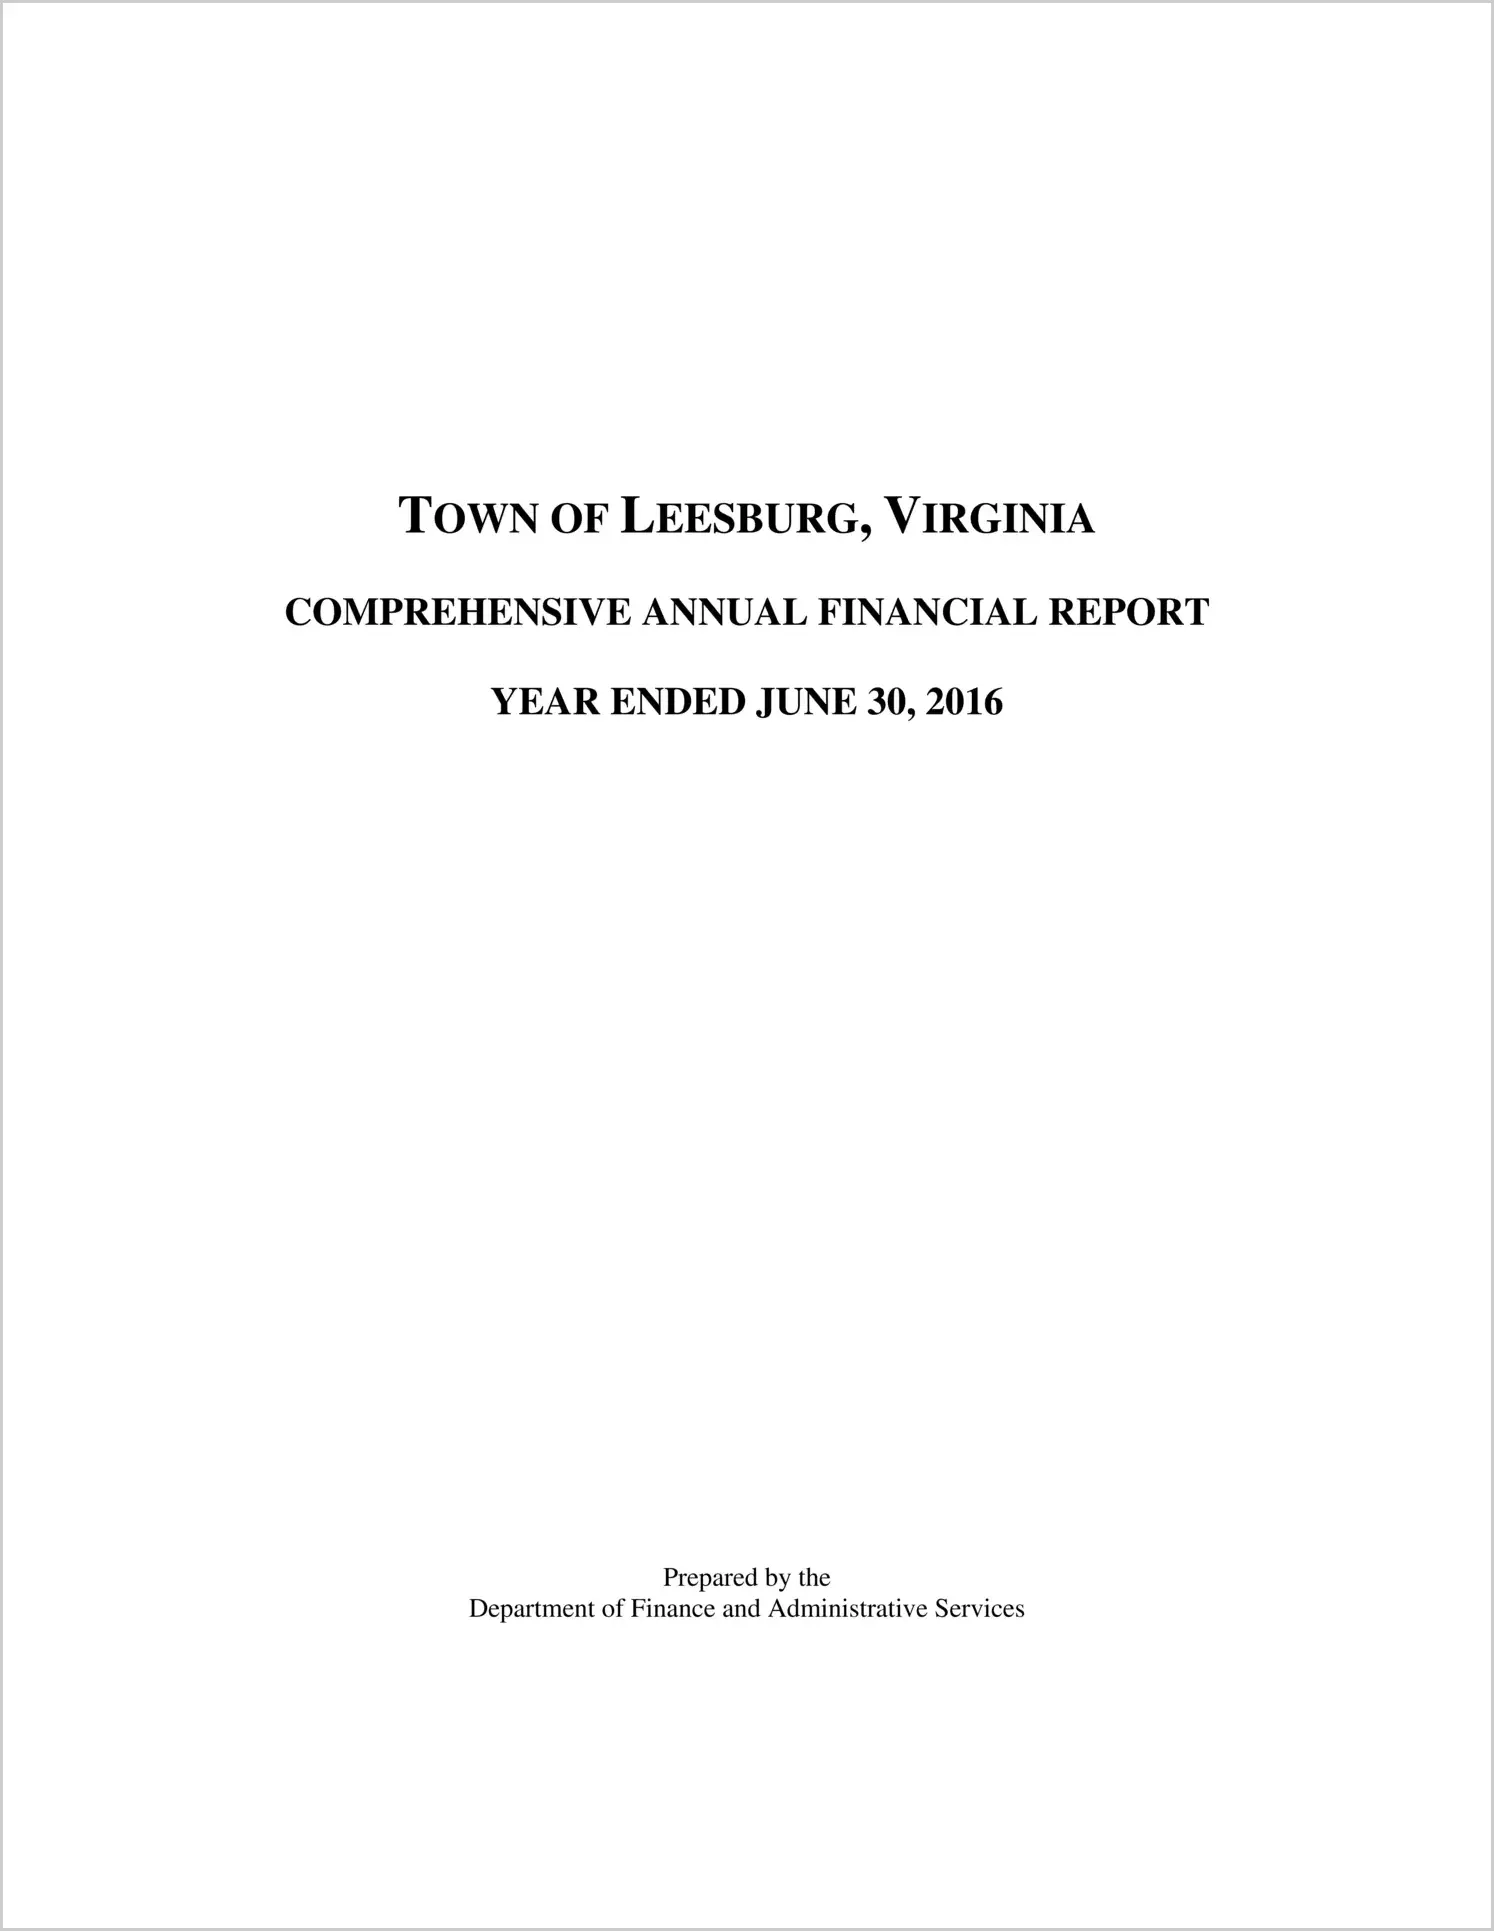 2016 Annual Financial Report for Town of Leesburg